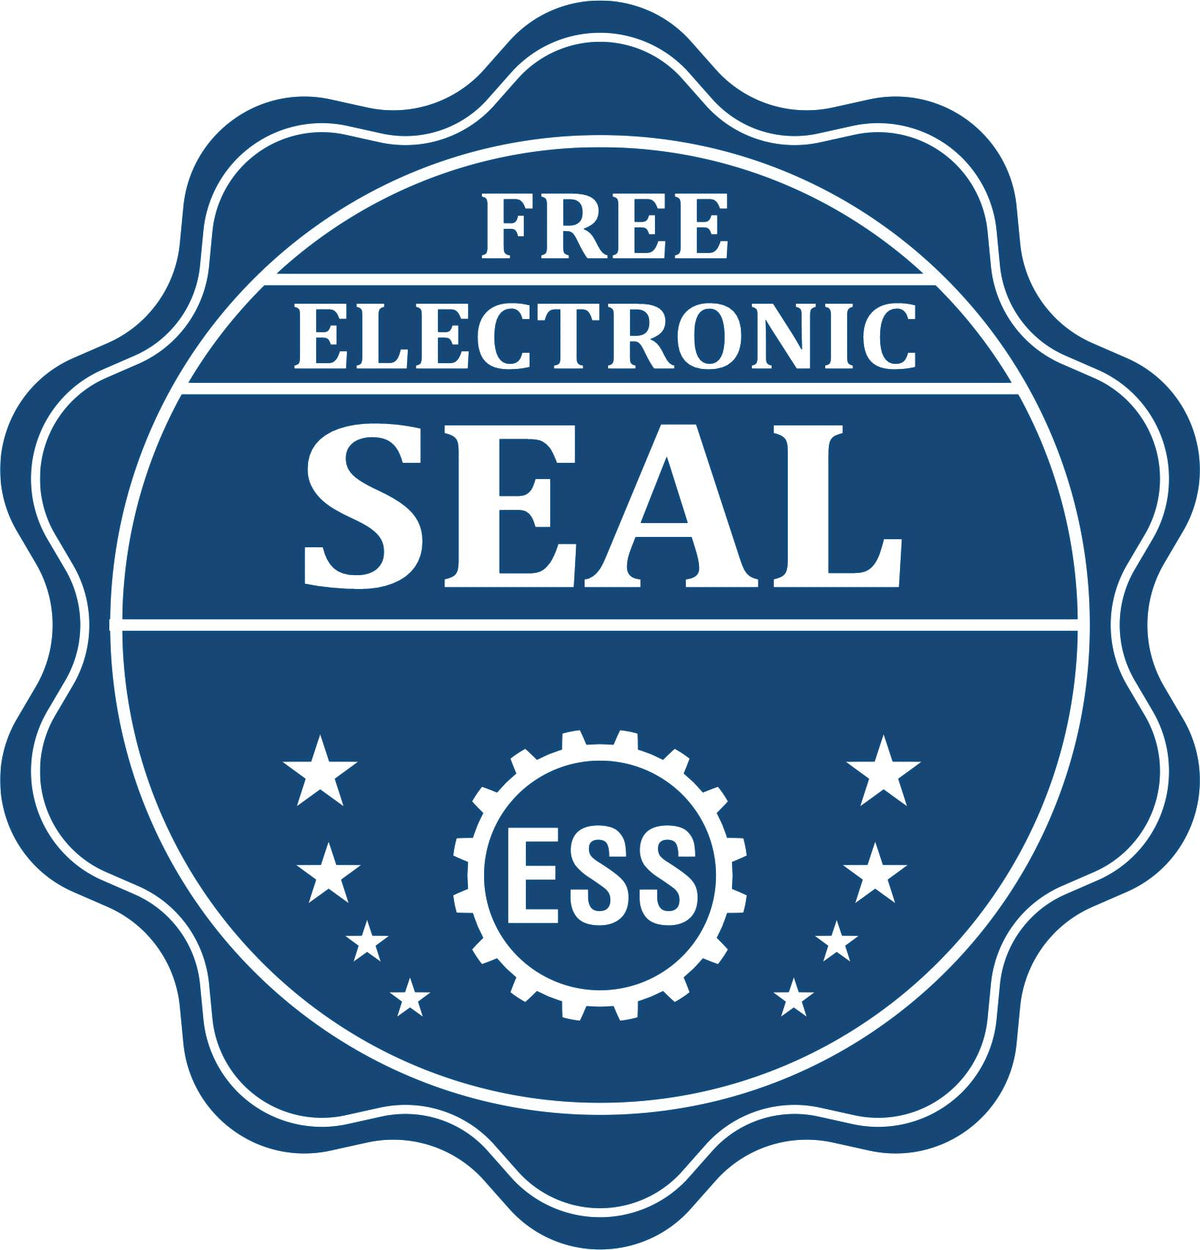 A badge showing a free electronic seal for the State of Louisiana Architectural Seal Embosser with stars and the ESS gear on the emblem.